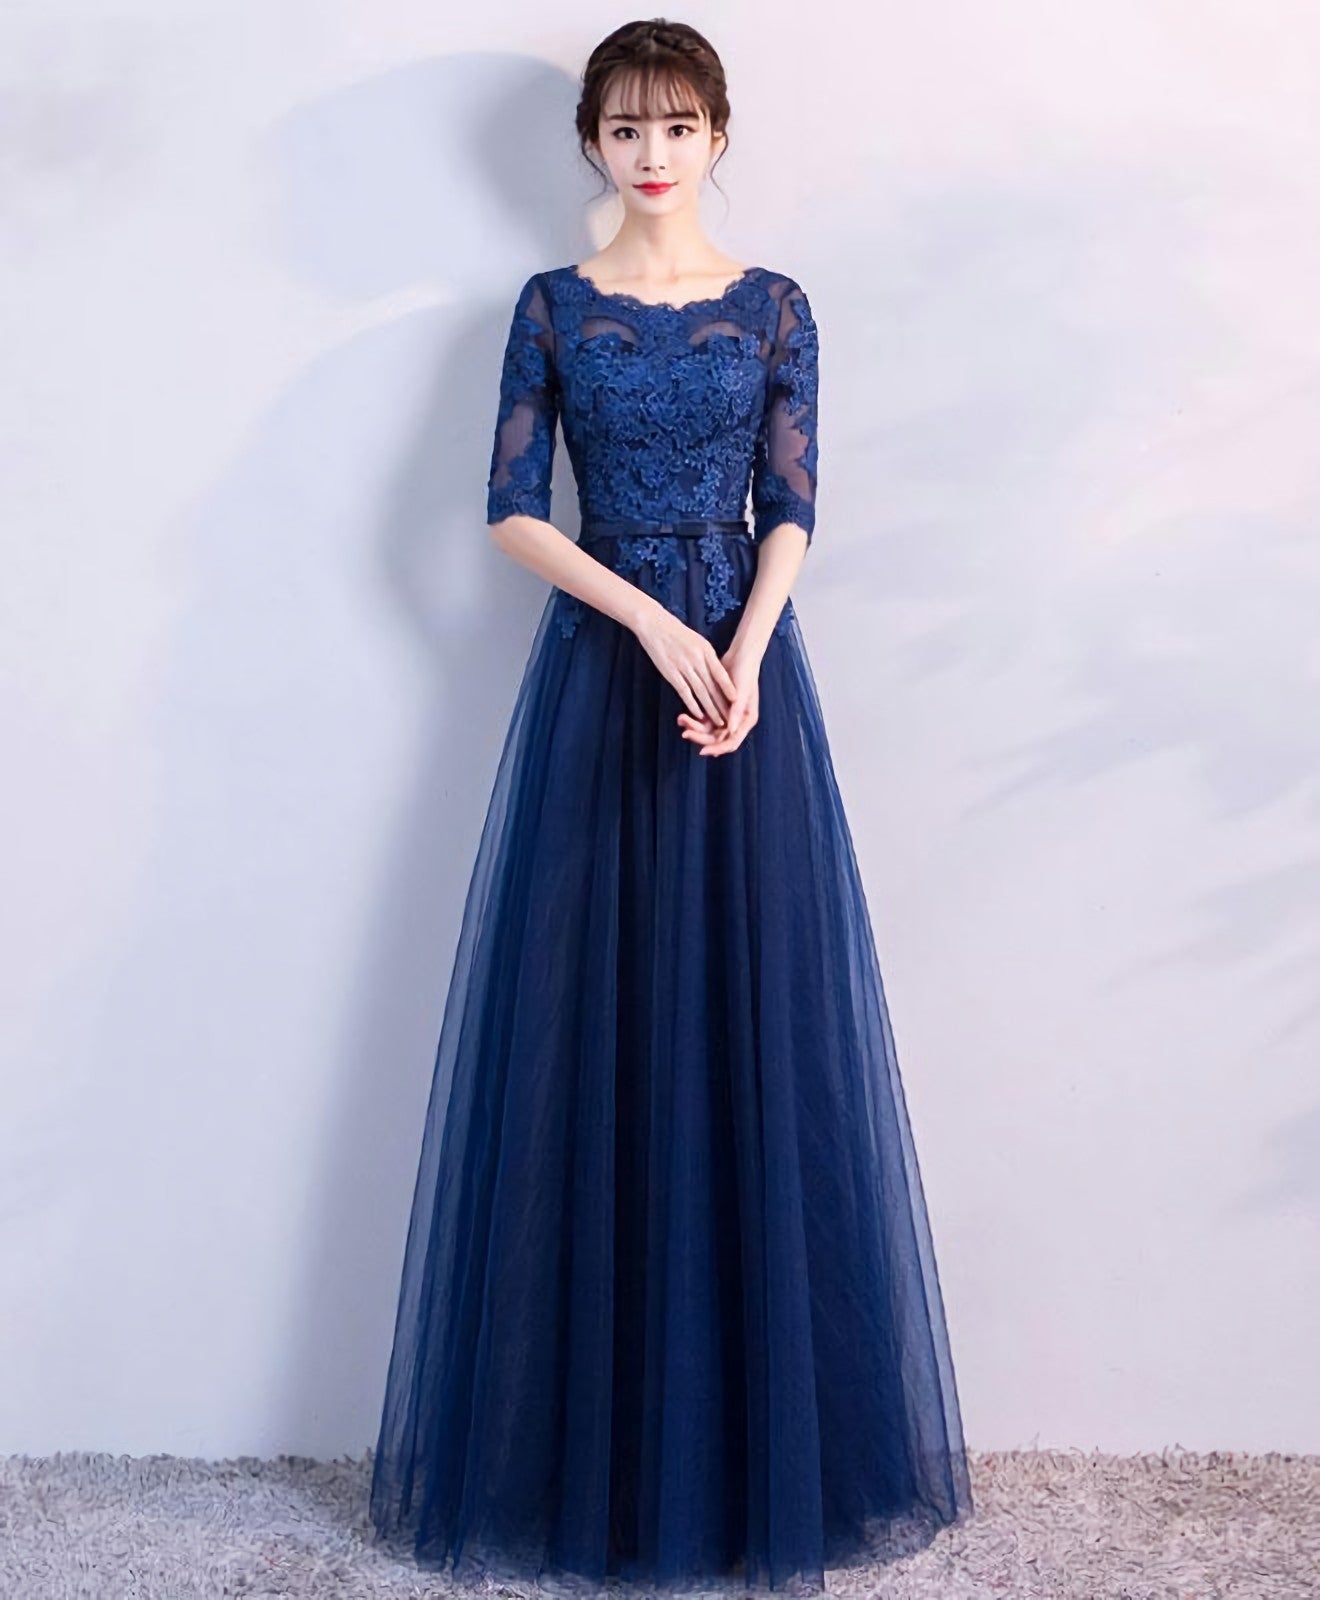 Blue Tulle Lace Long Prom Dress, Lace Evening Dress